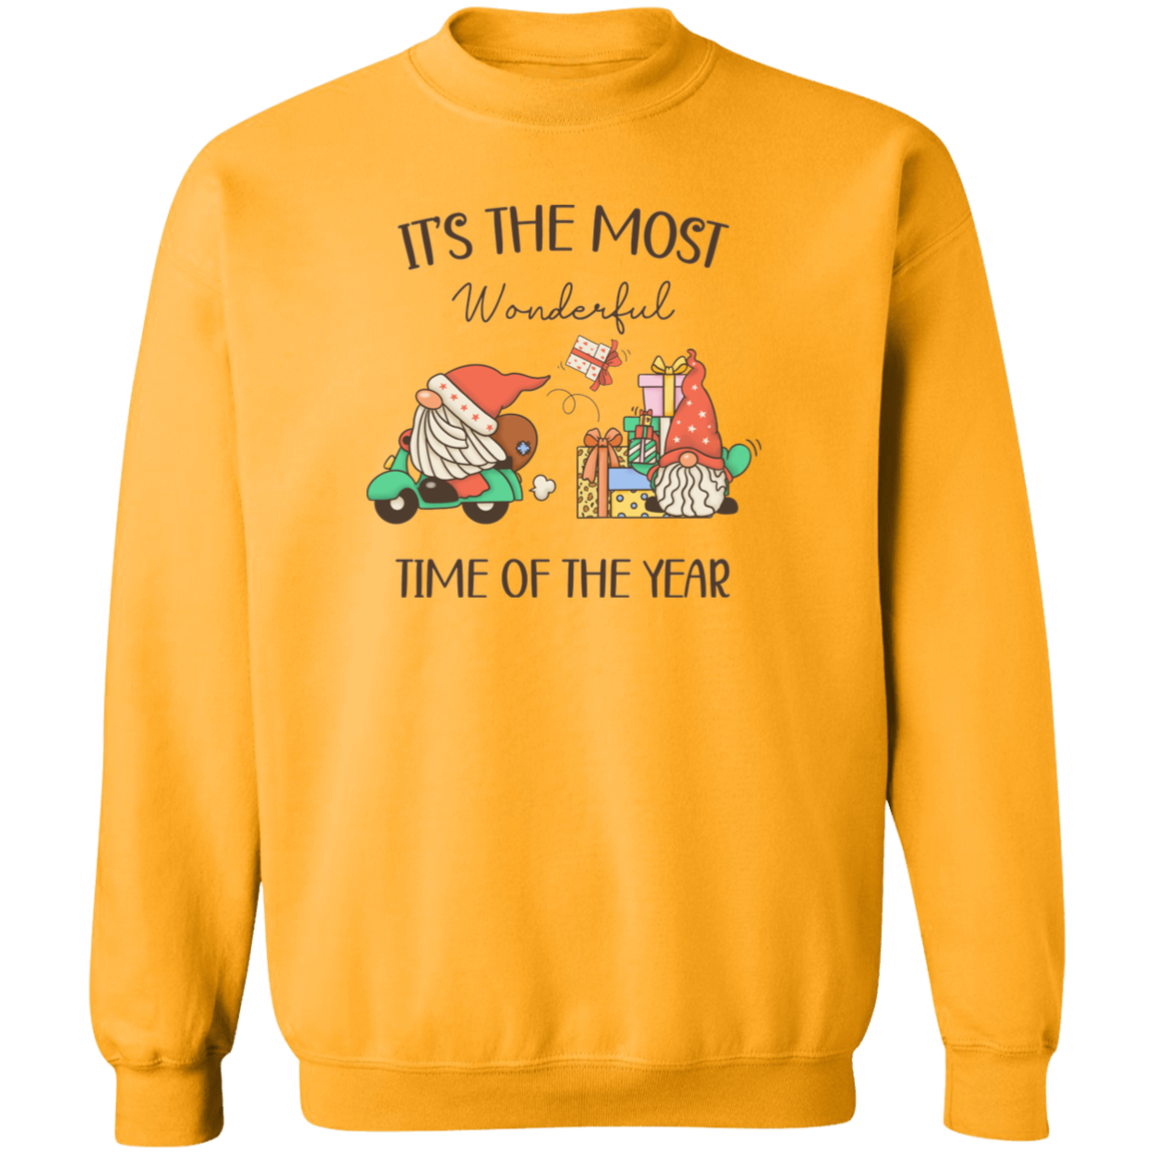 The Most Wonderful Time Of The Year Sweatshirt